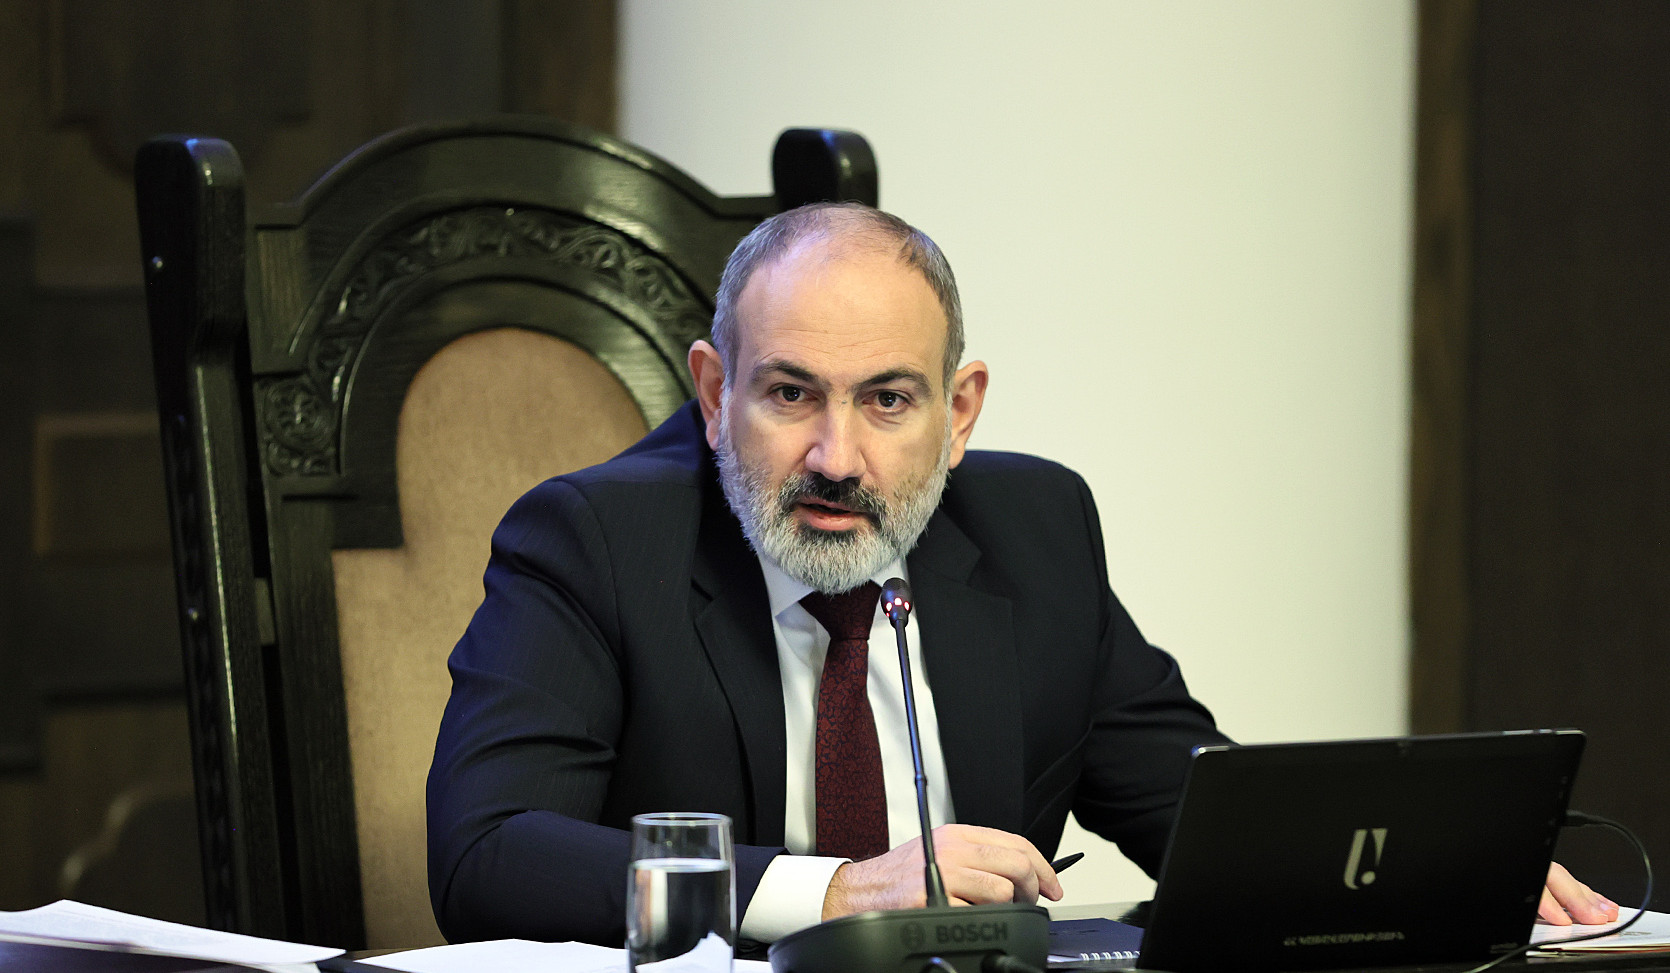 Armenian Prime Minister Pashinyan's speech about the situation in the Lachin Corridor and the work on the next phase of the draft peace treaty with Azerbaijan